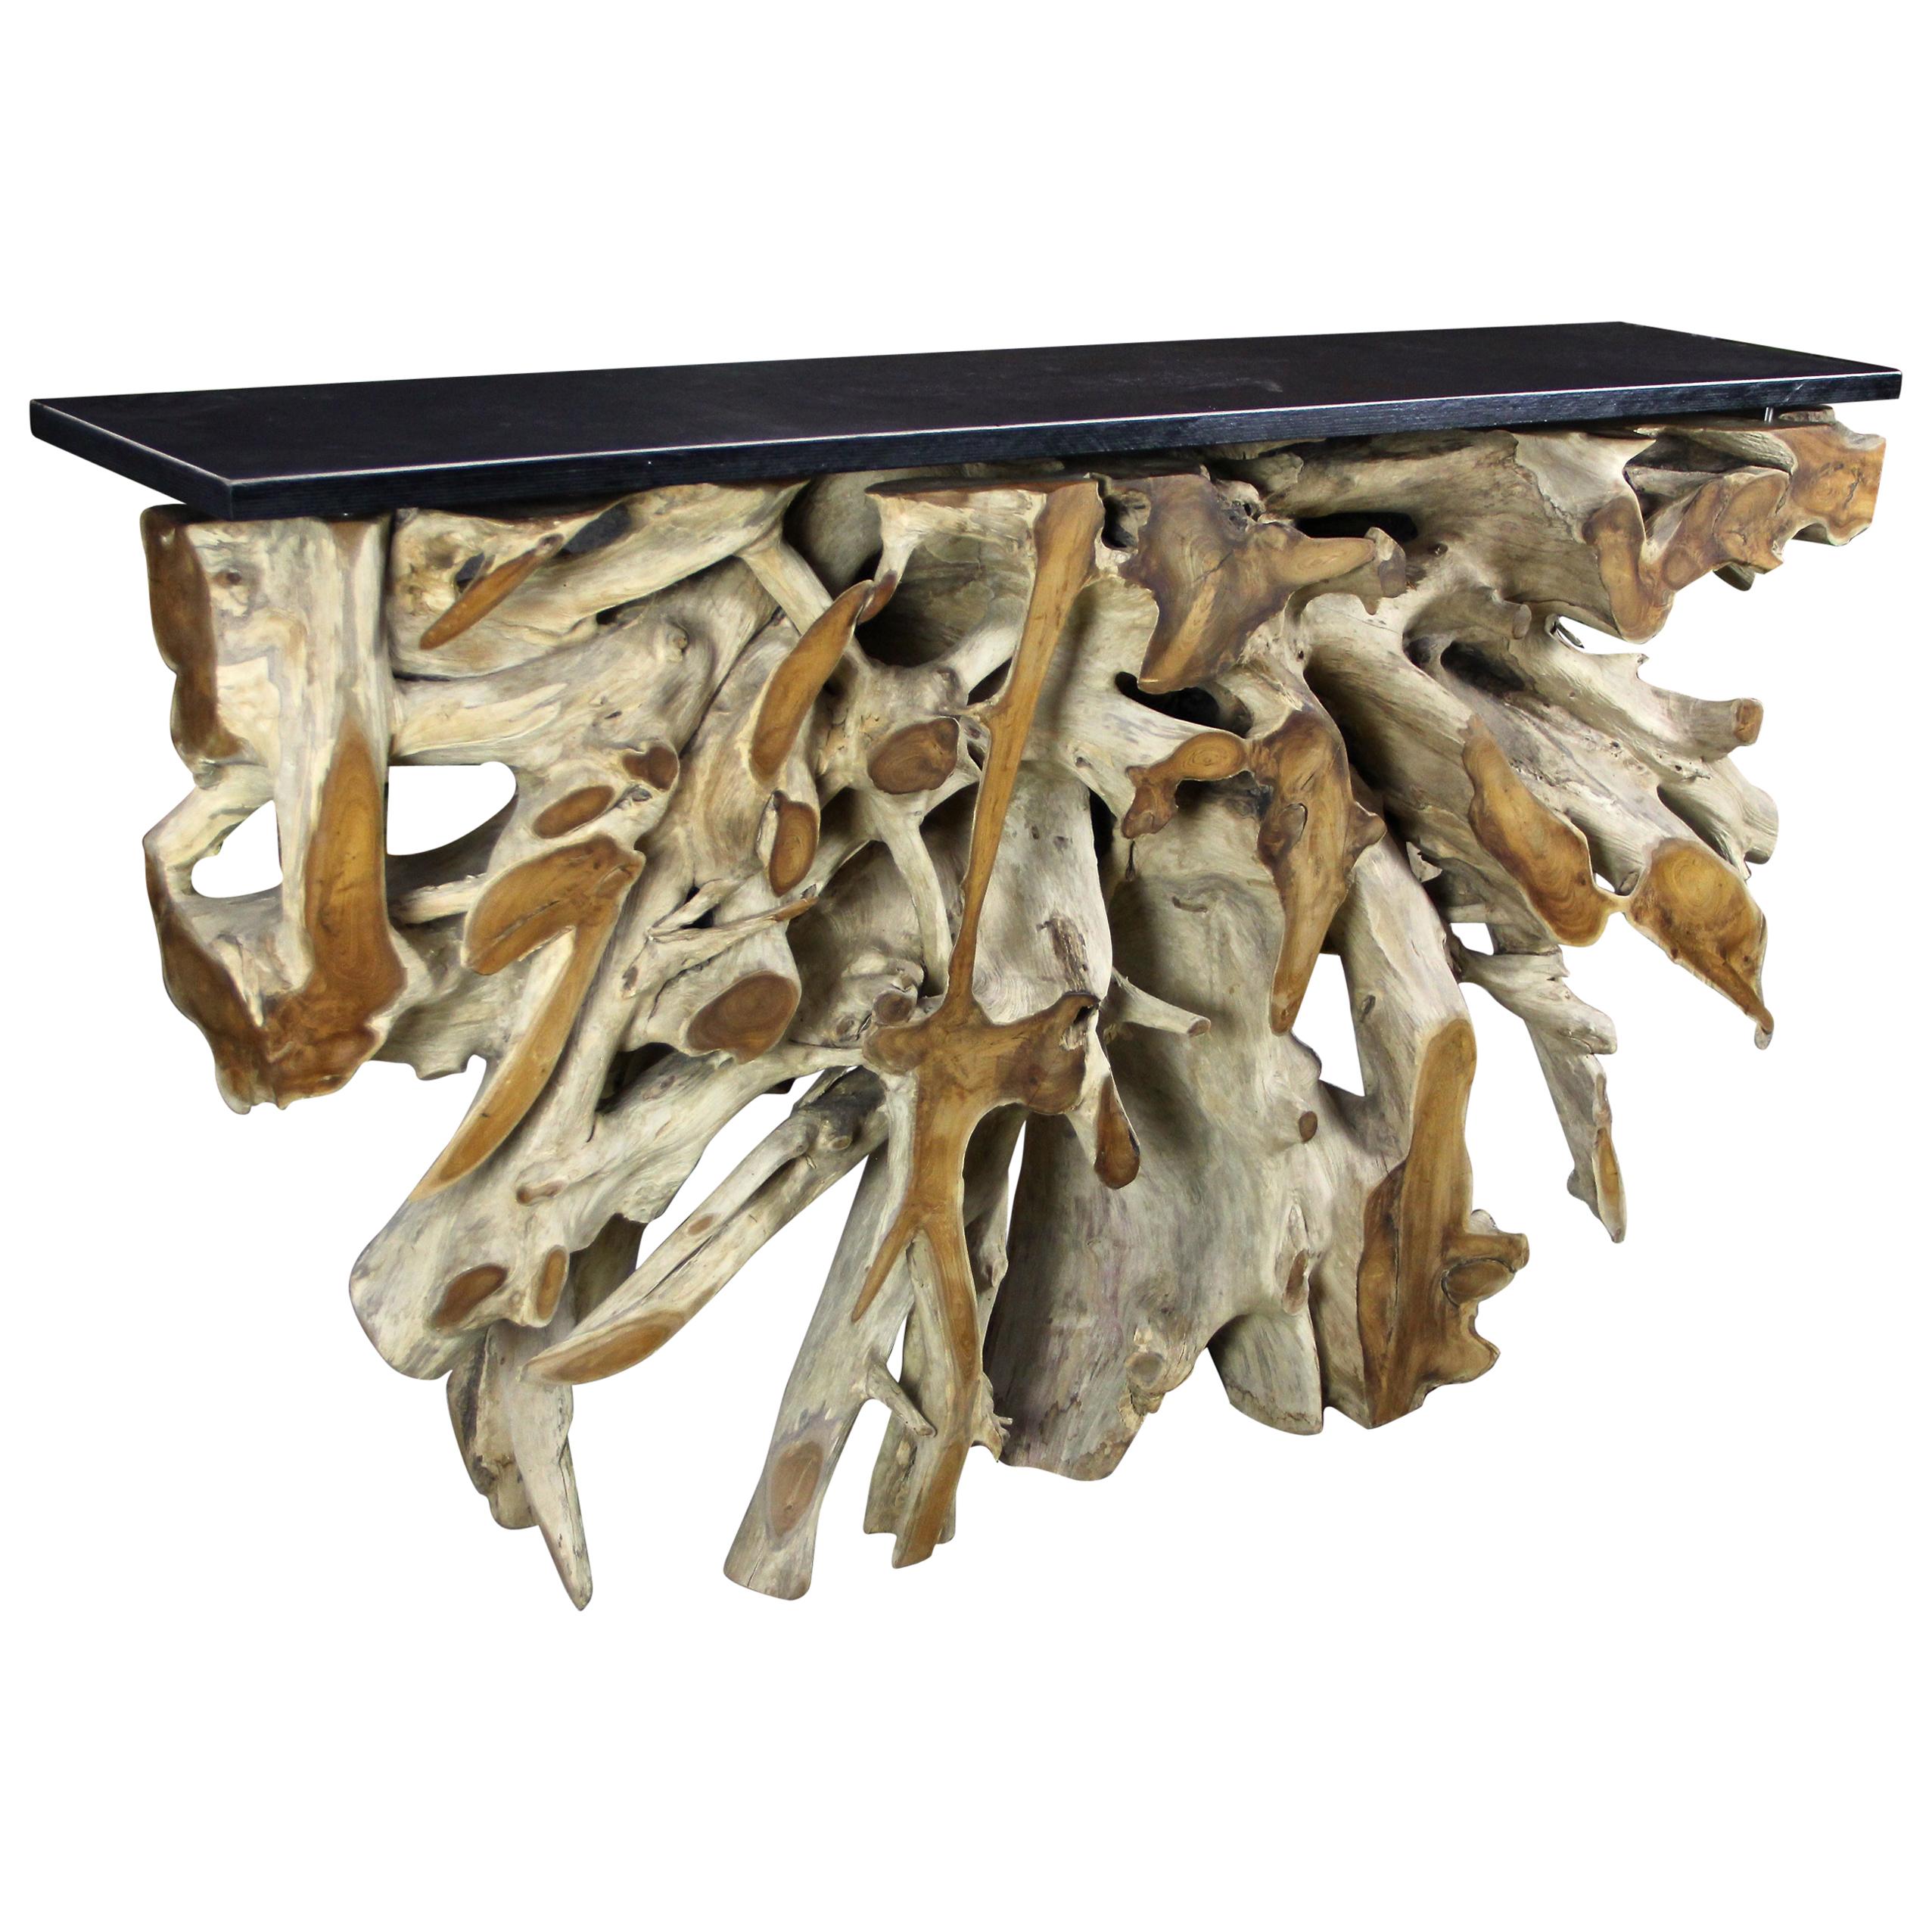 Organic Modern Console Table or Bar Counter, Teak Root with Black Wood